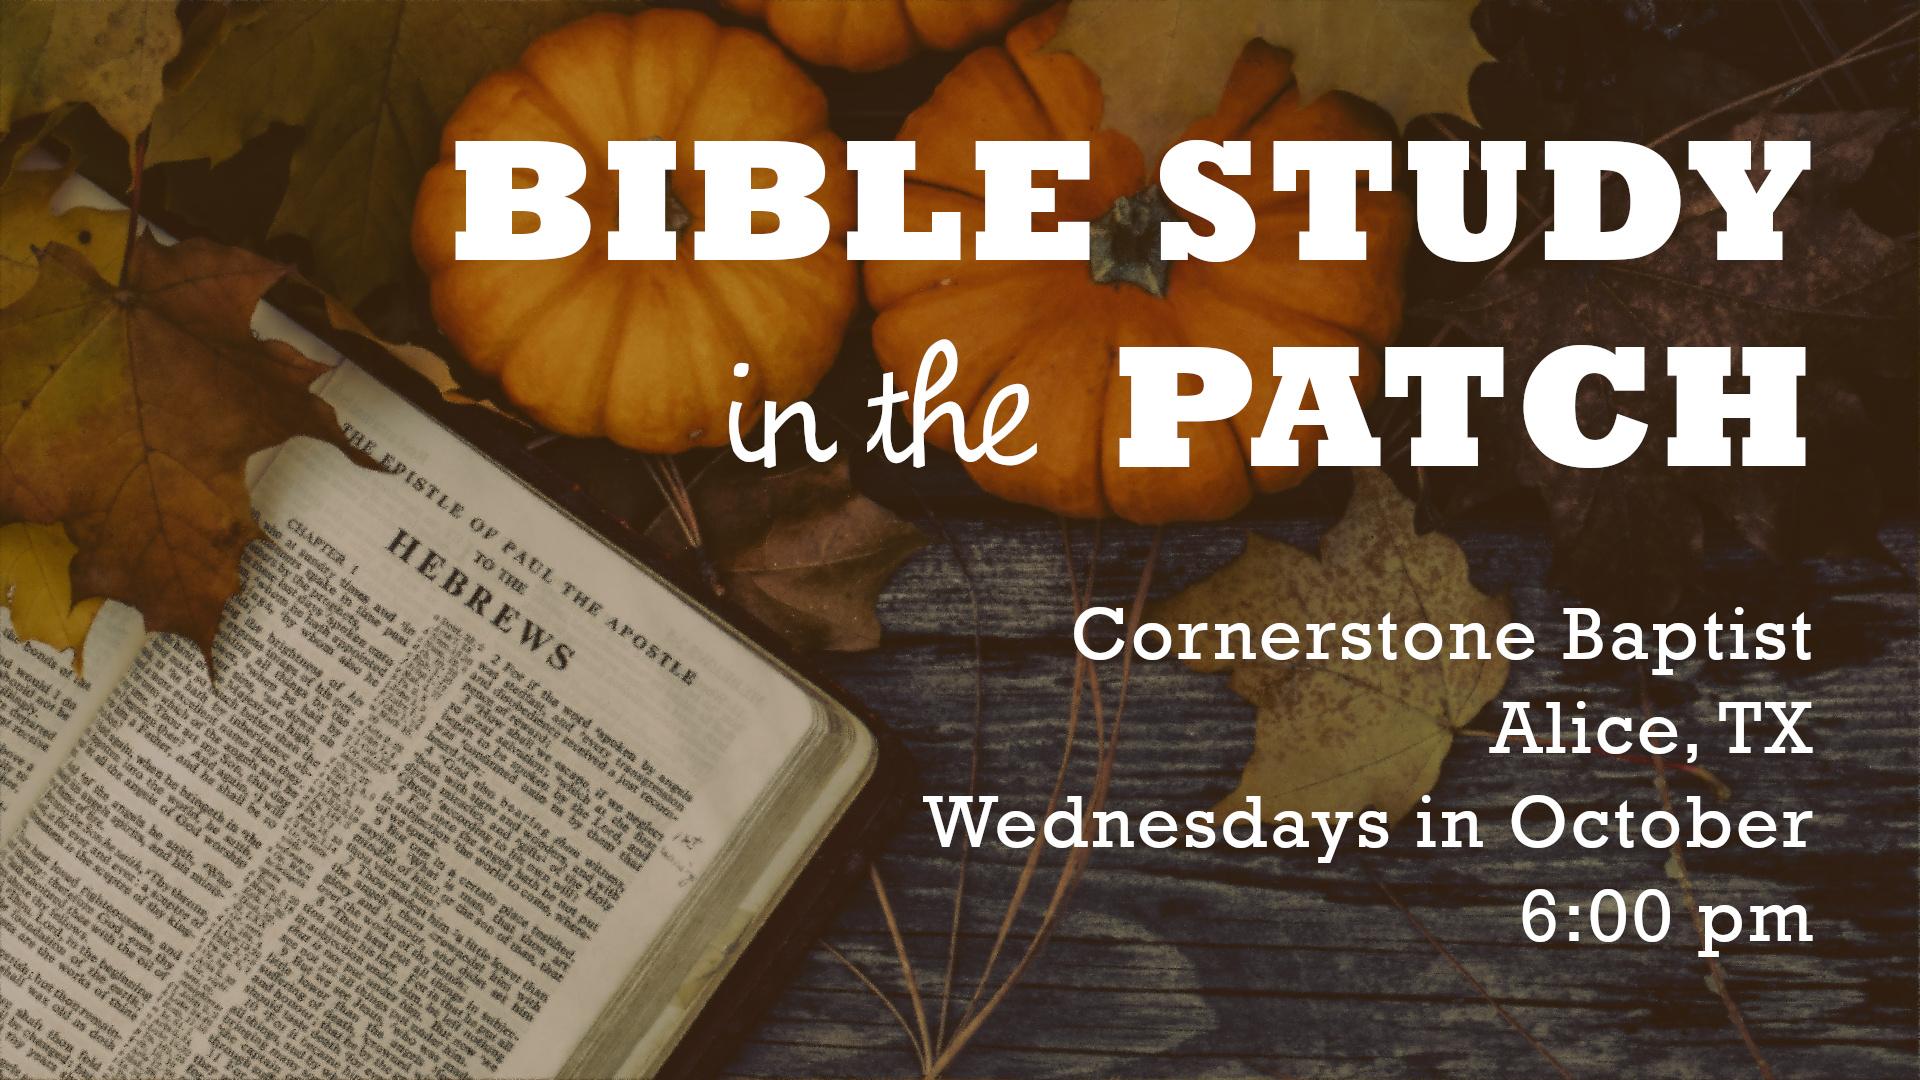 Wednesday night Bible study in the Pumpkin Patch at Cornerstone Baptist Church, Alice, Texas